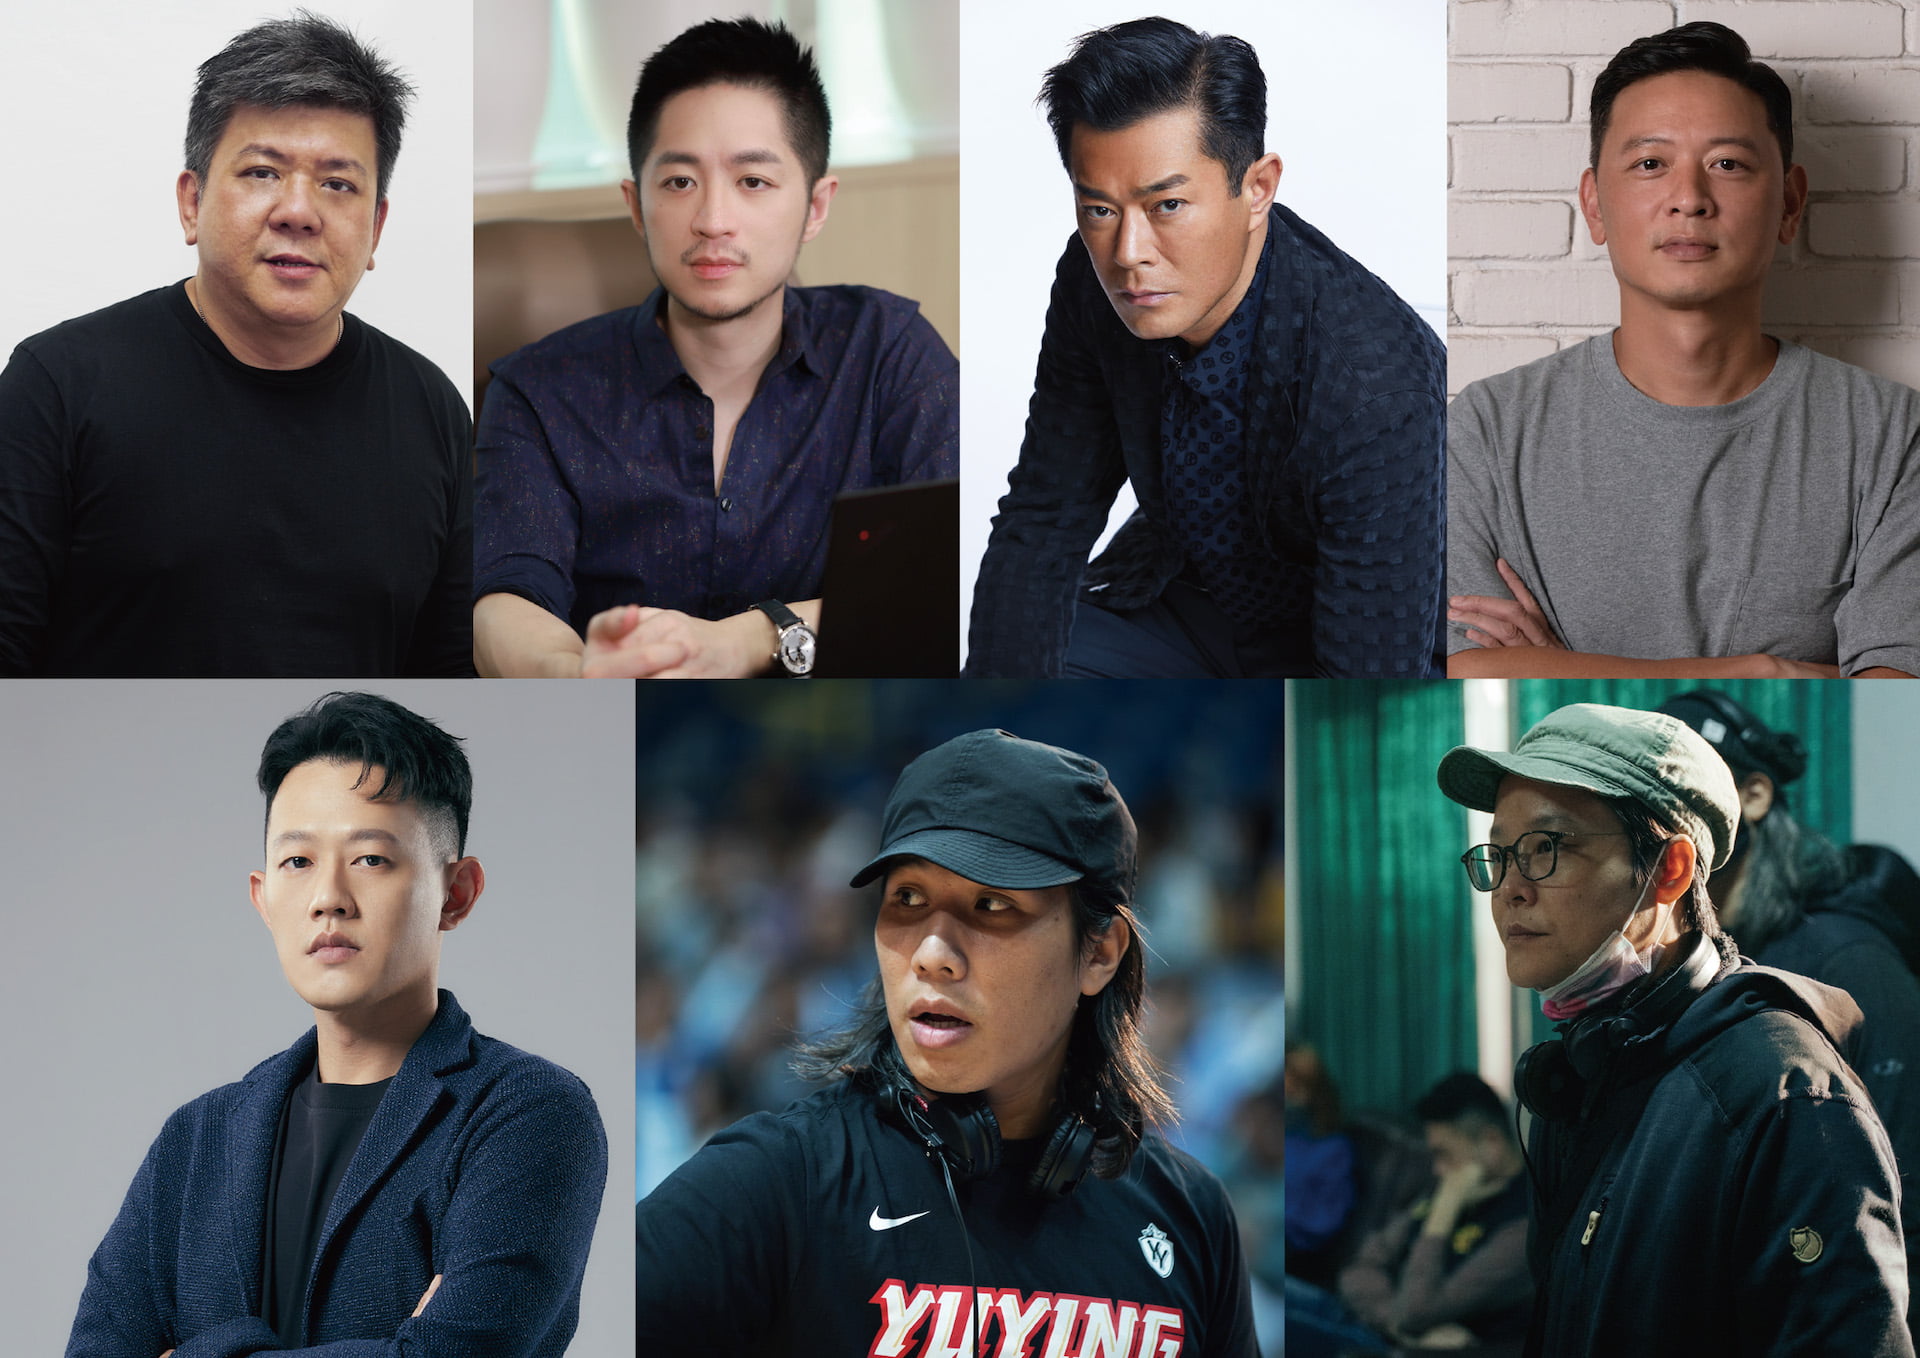 (clockwise from top left): Melvin Ang, executive chairman of mm2 (Agent From Above); Lincoln Lai, director & executive producer (The Nipple Talk); Louis Koo, founder of One Cool Pictures & executive producer (Warriors of Future); Yuen Fai Ng, director (Warriors of Future); David Chuang, director (The Victims’ Game S2); Chang Jung-chi, director (Copycat Killer); Henri Chang, director (Copycat Killer)